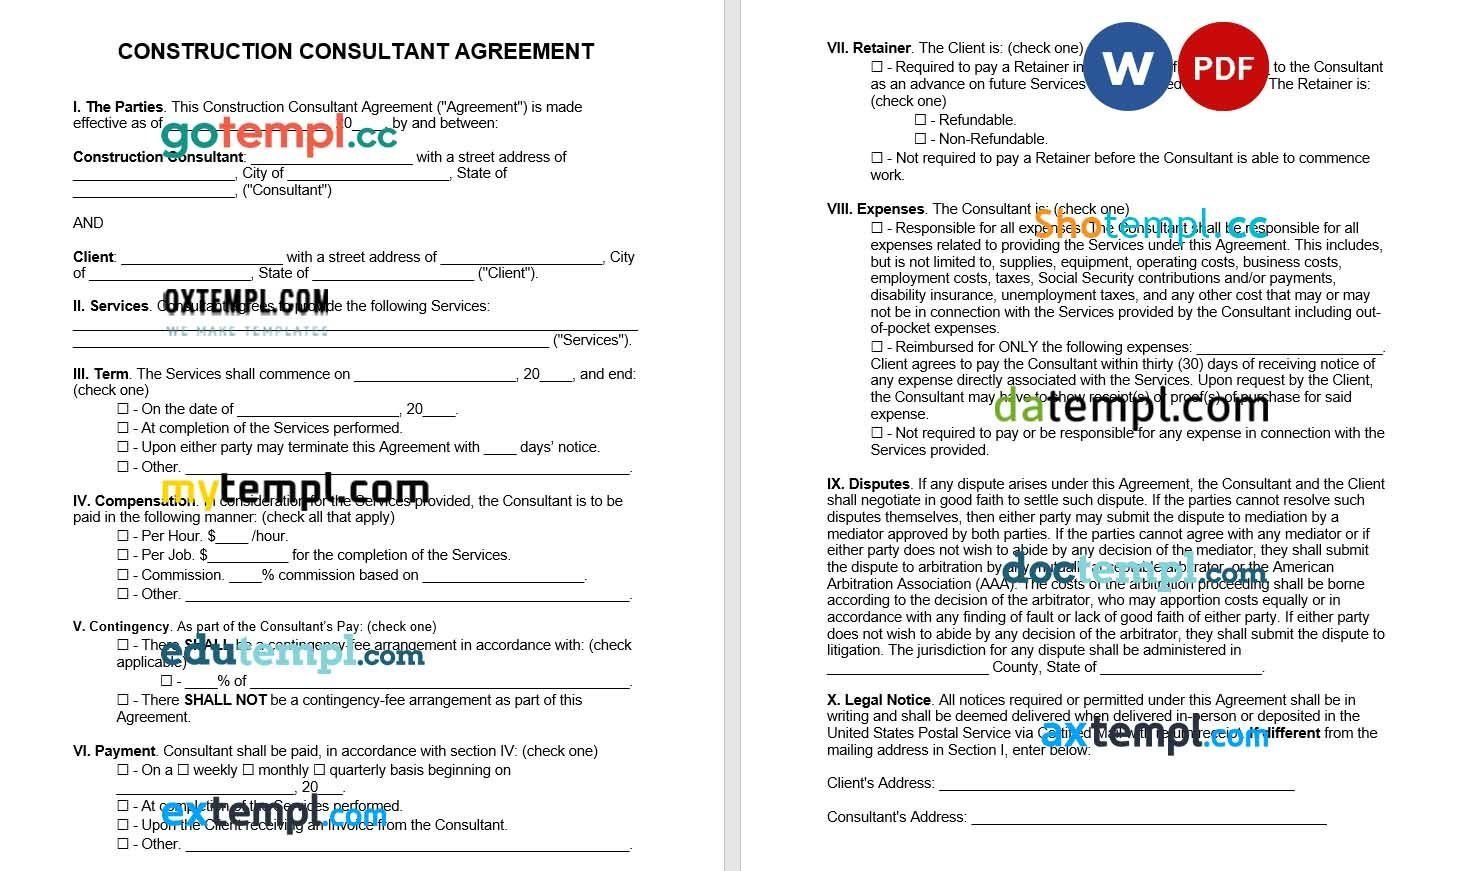 Construction Consultant Agreement Word example, fully editable